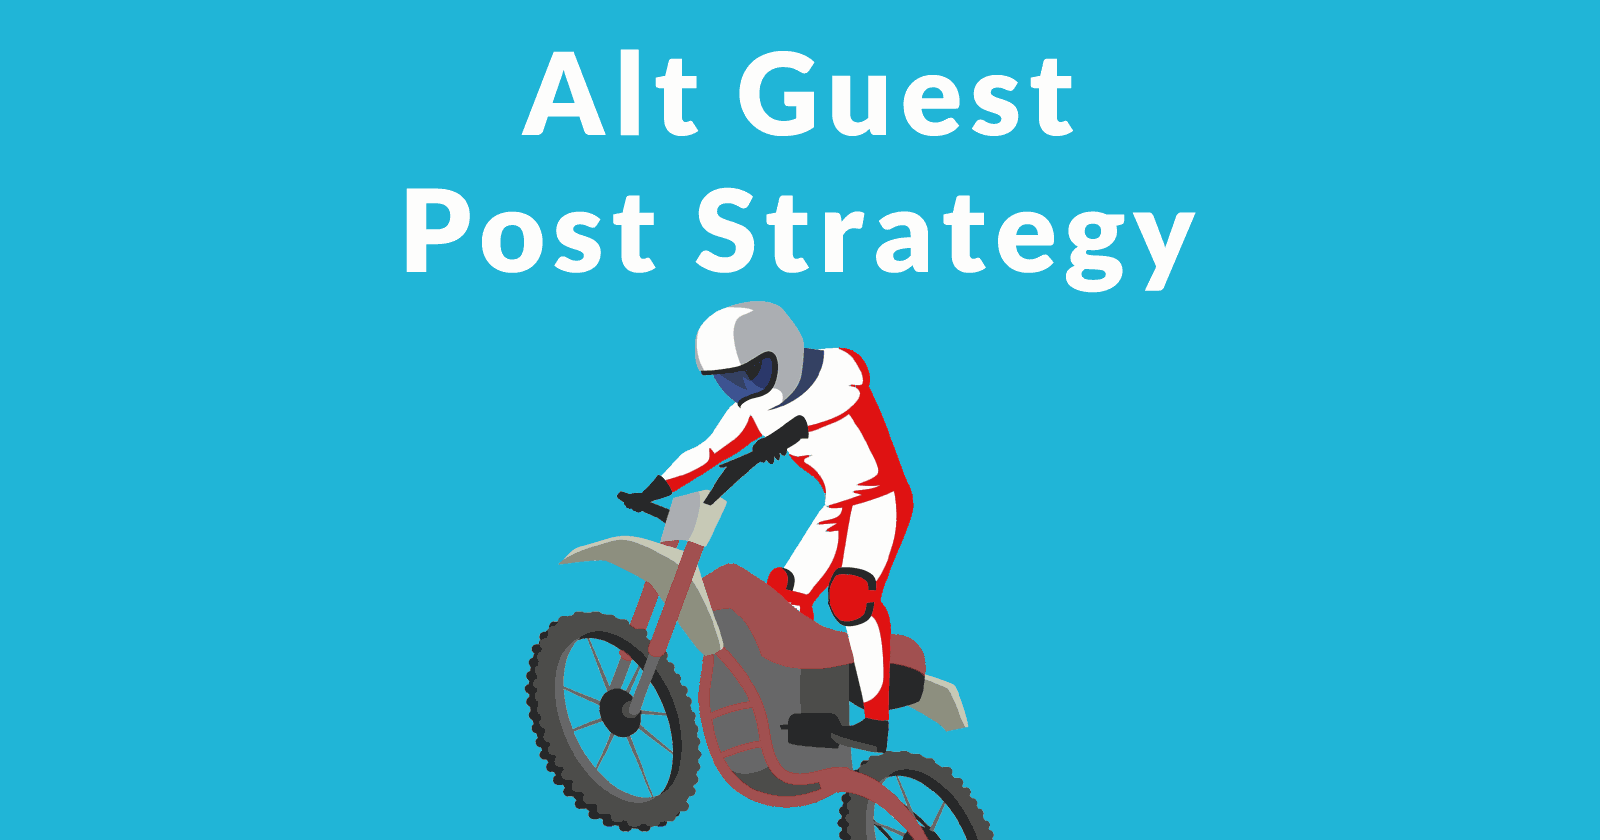 Alternative Guest Post Strategy